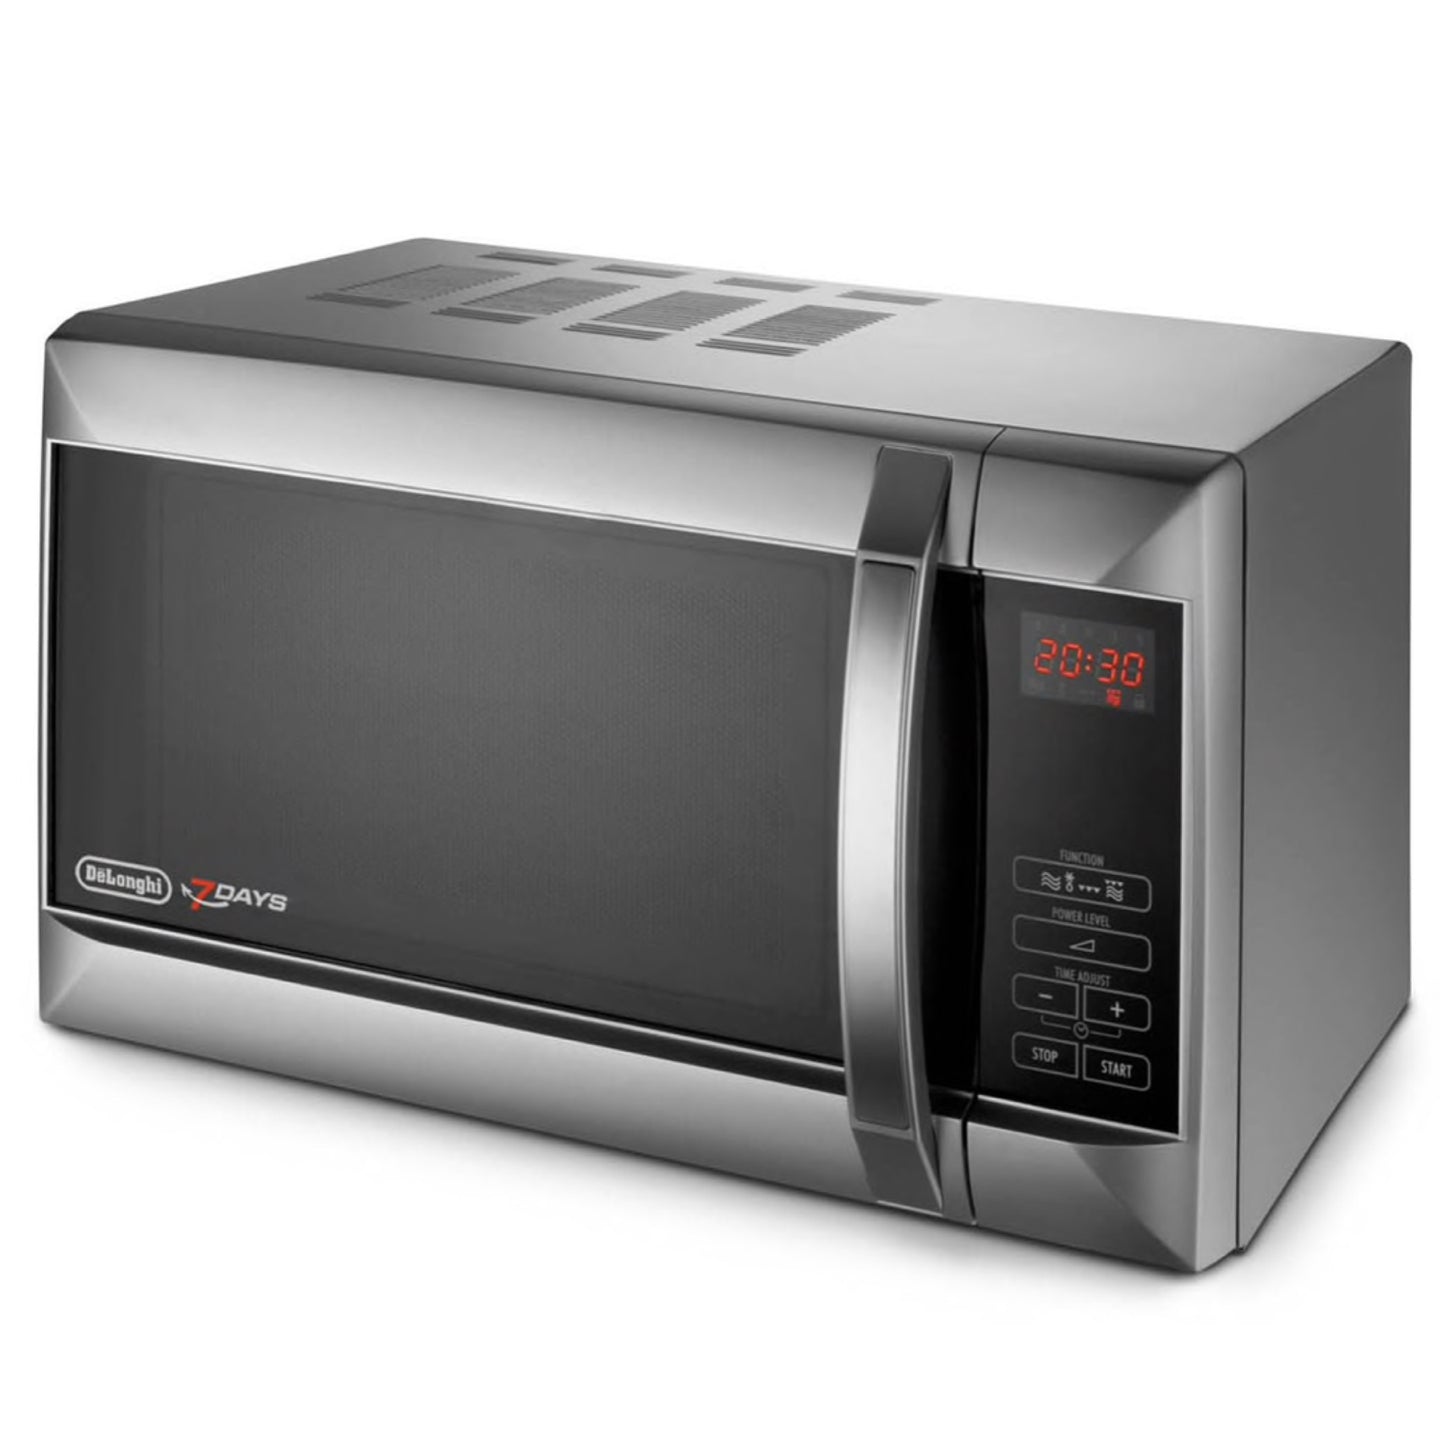 Delonghi MW505 Ovens & Microwaves